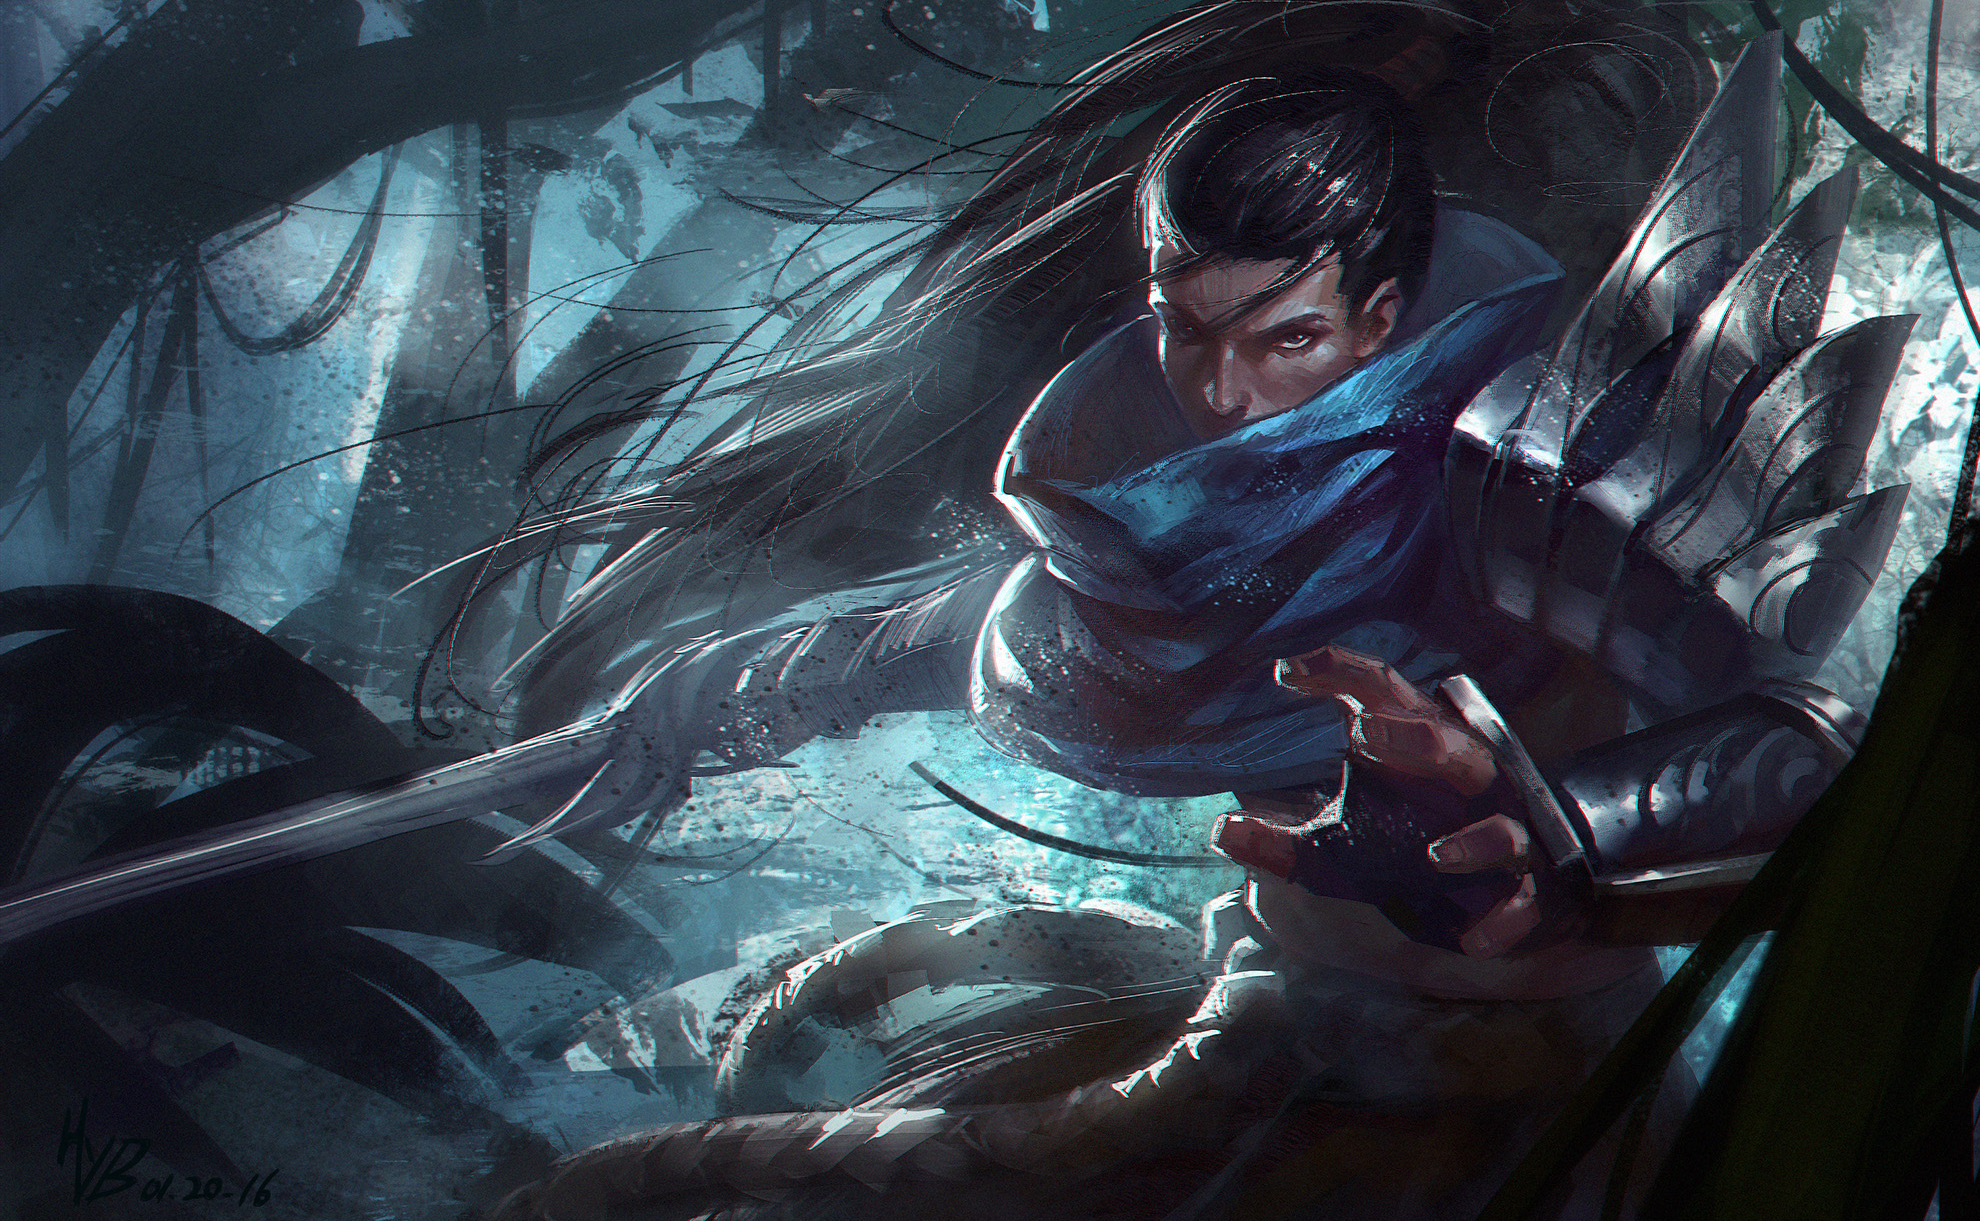 HD wallpaper: LoL Project Yasuo wallpaper, League of Legends, real people,  one person | Wallpaper Flare